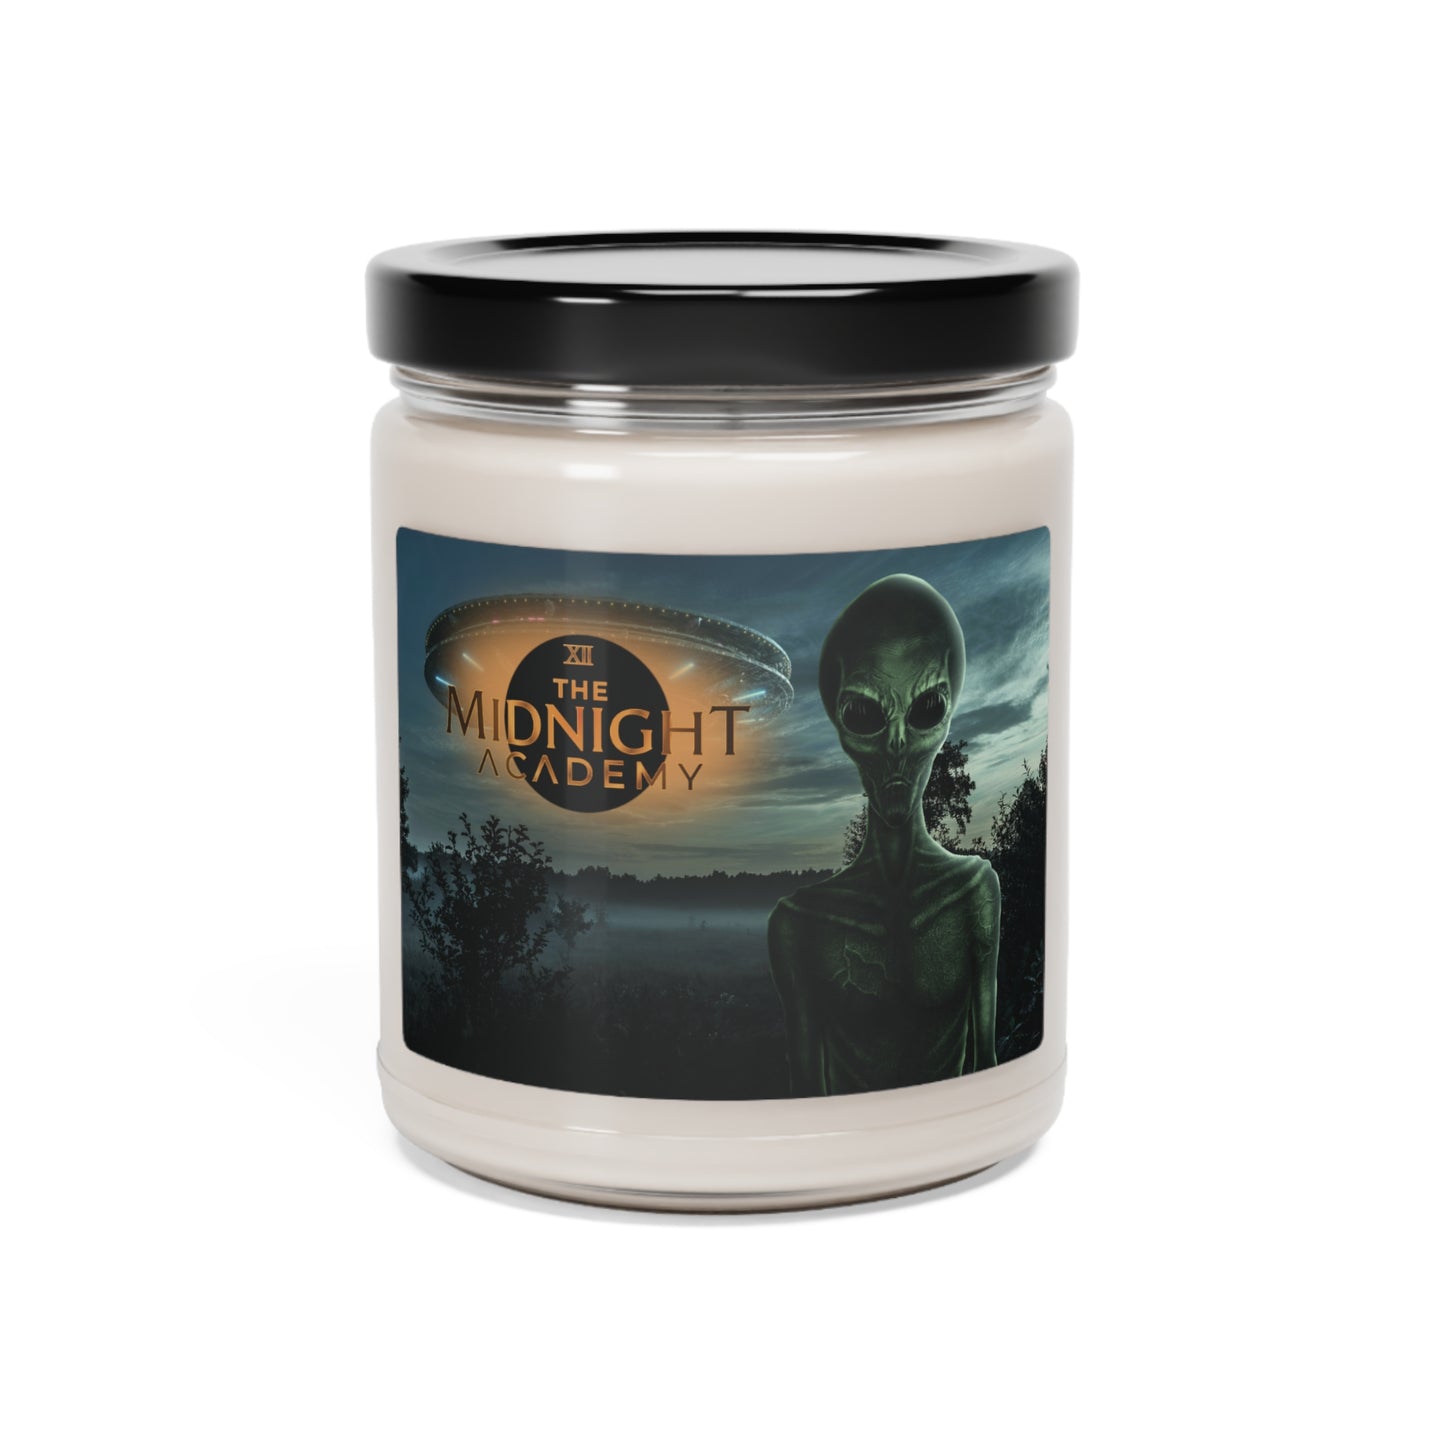 Dreamland - White Sage and Lavender Scented Soy Candle, 9oz